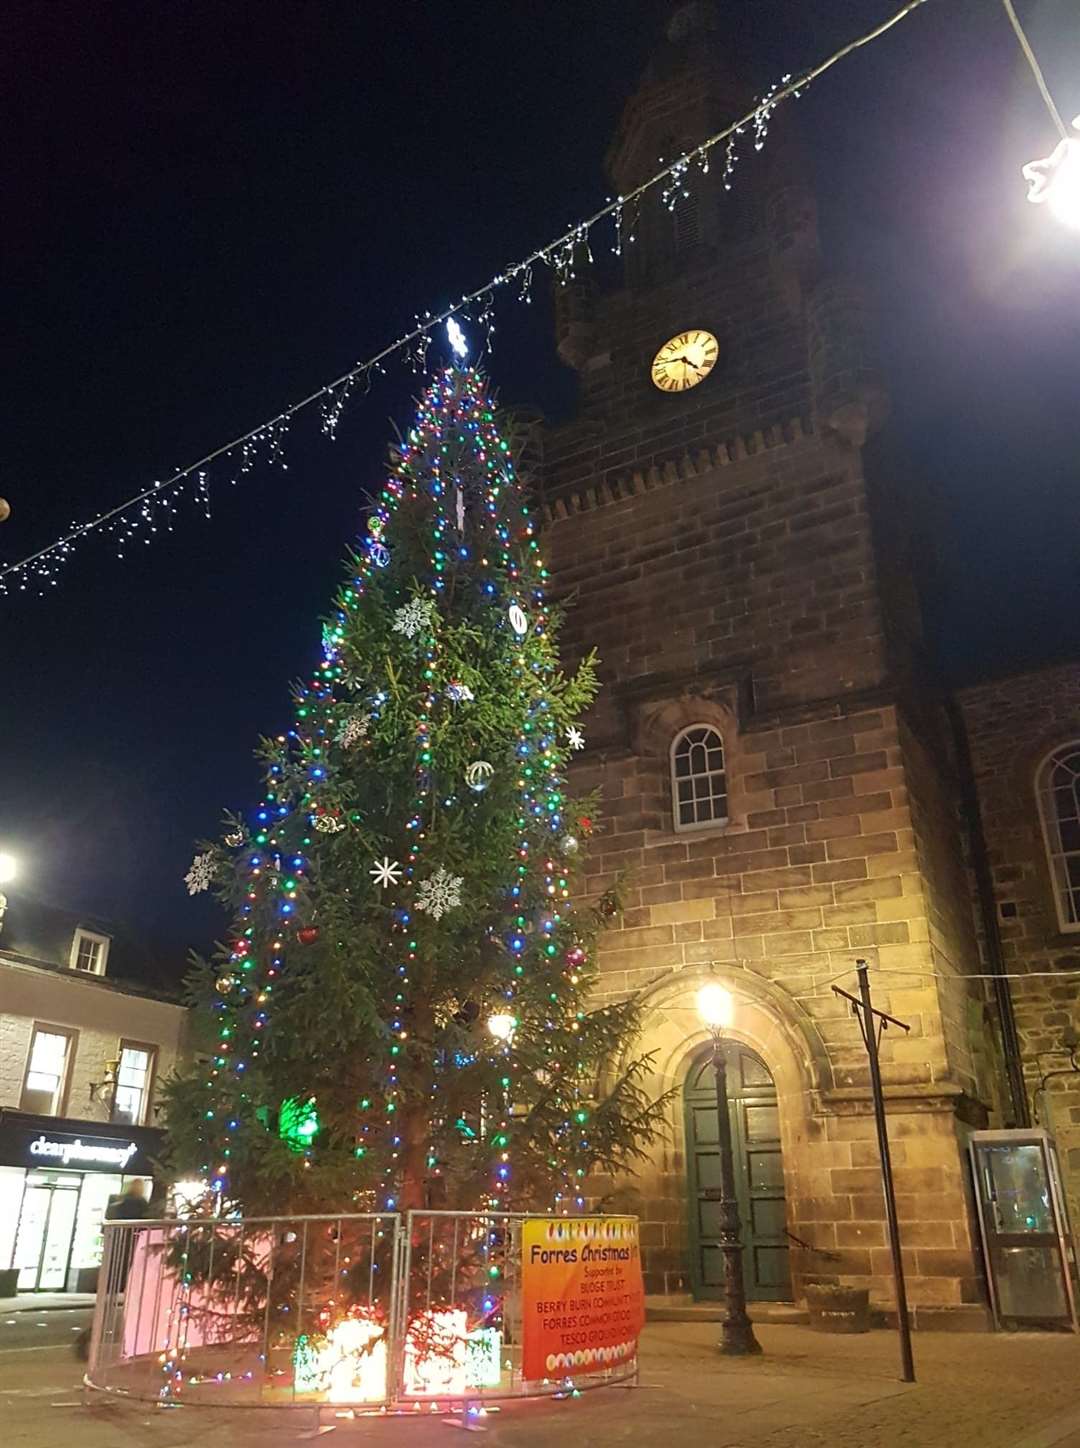 The tree and Tolbooth at the heart of Forres.